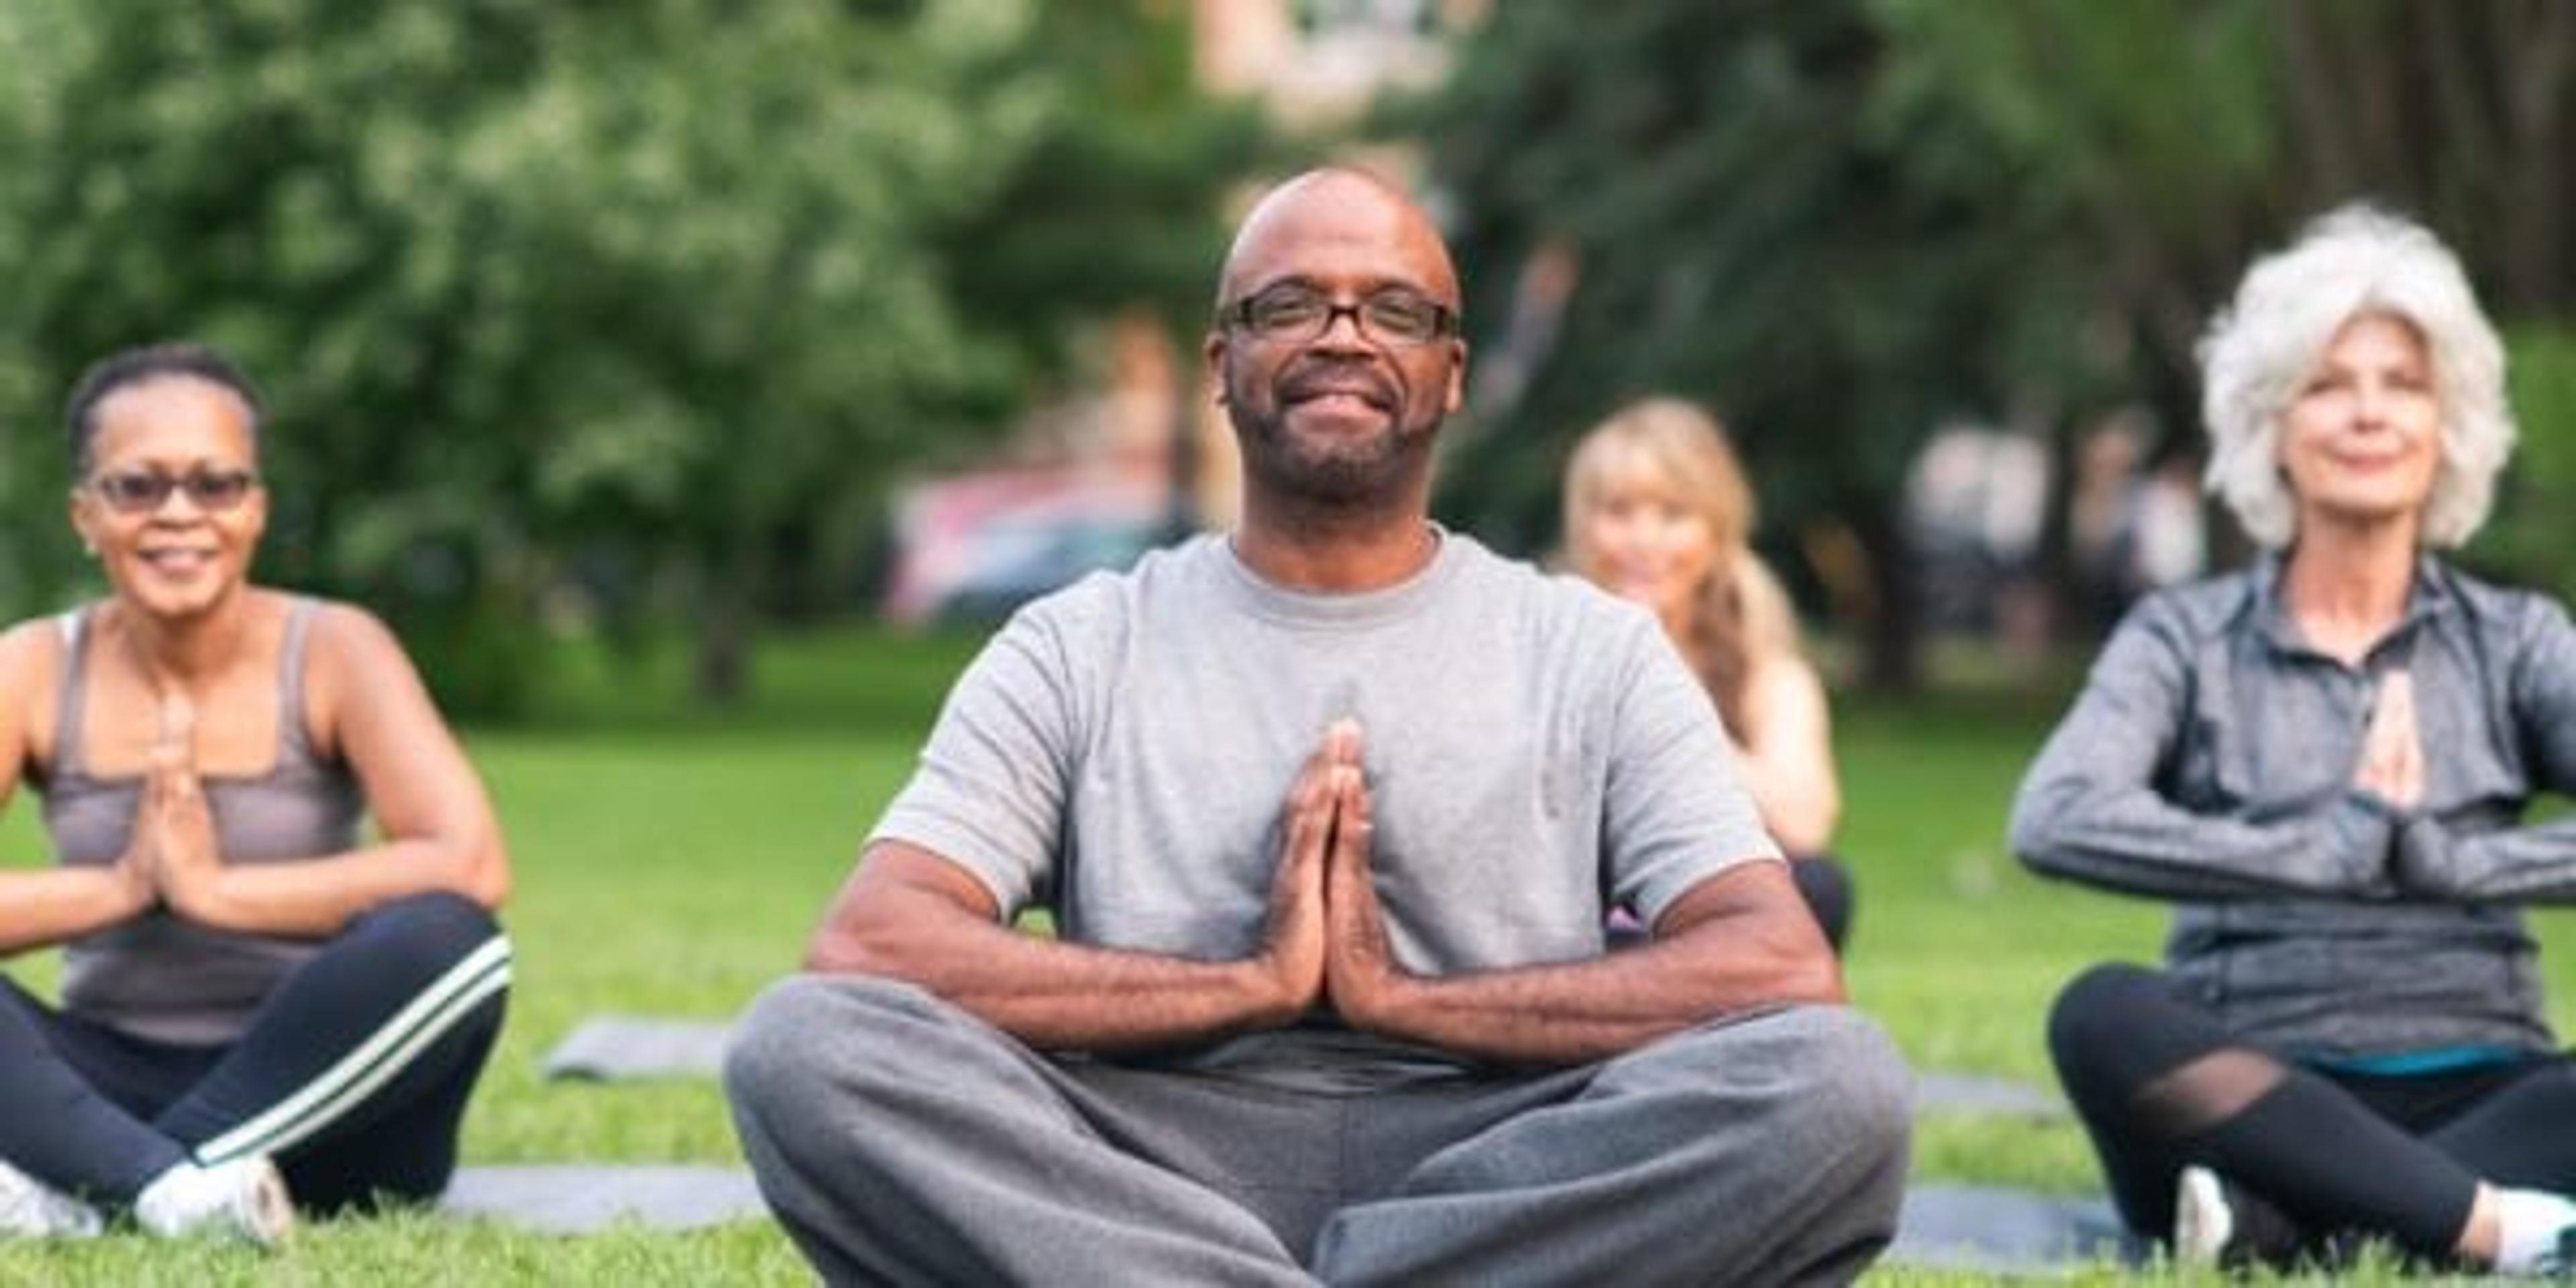 A multi-ethnic group of seniors is attending a yoga class outdoors. The group is sitting on yoga mats. They are meditating. The individual in focus is a black man. He is sitting at the front of the group. He is smiling directly at the camera.